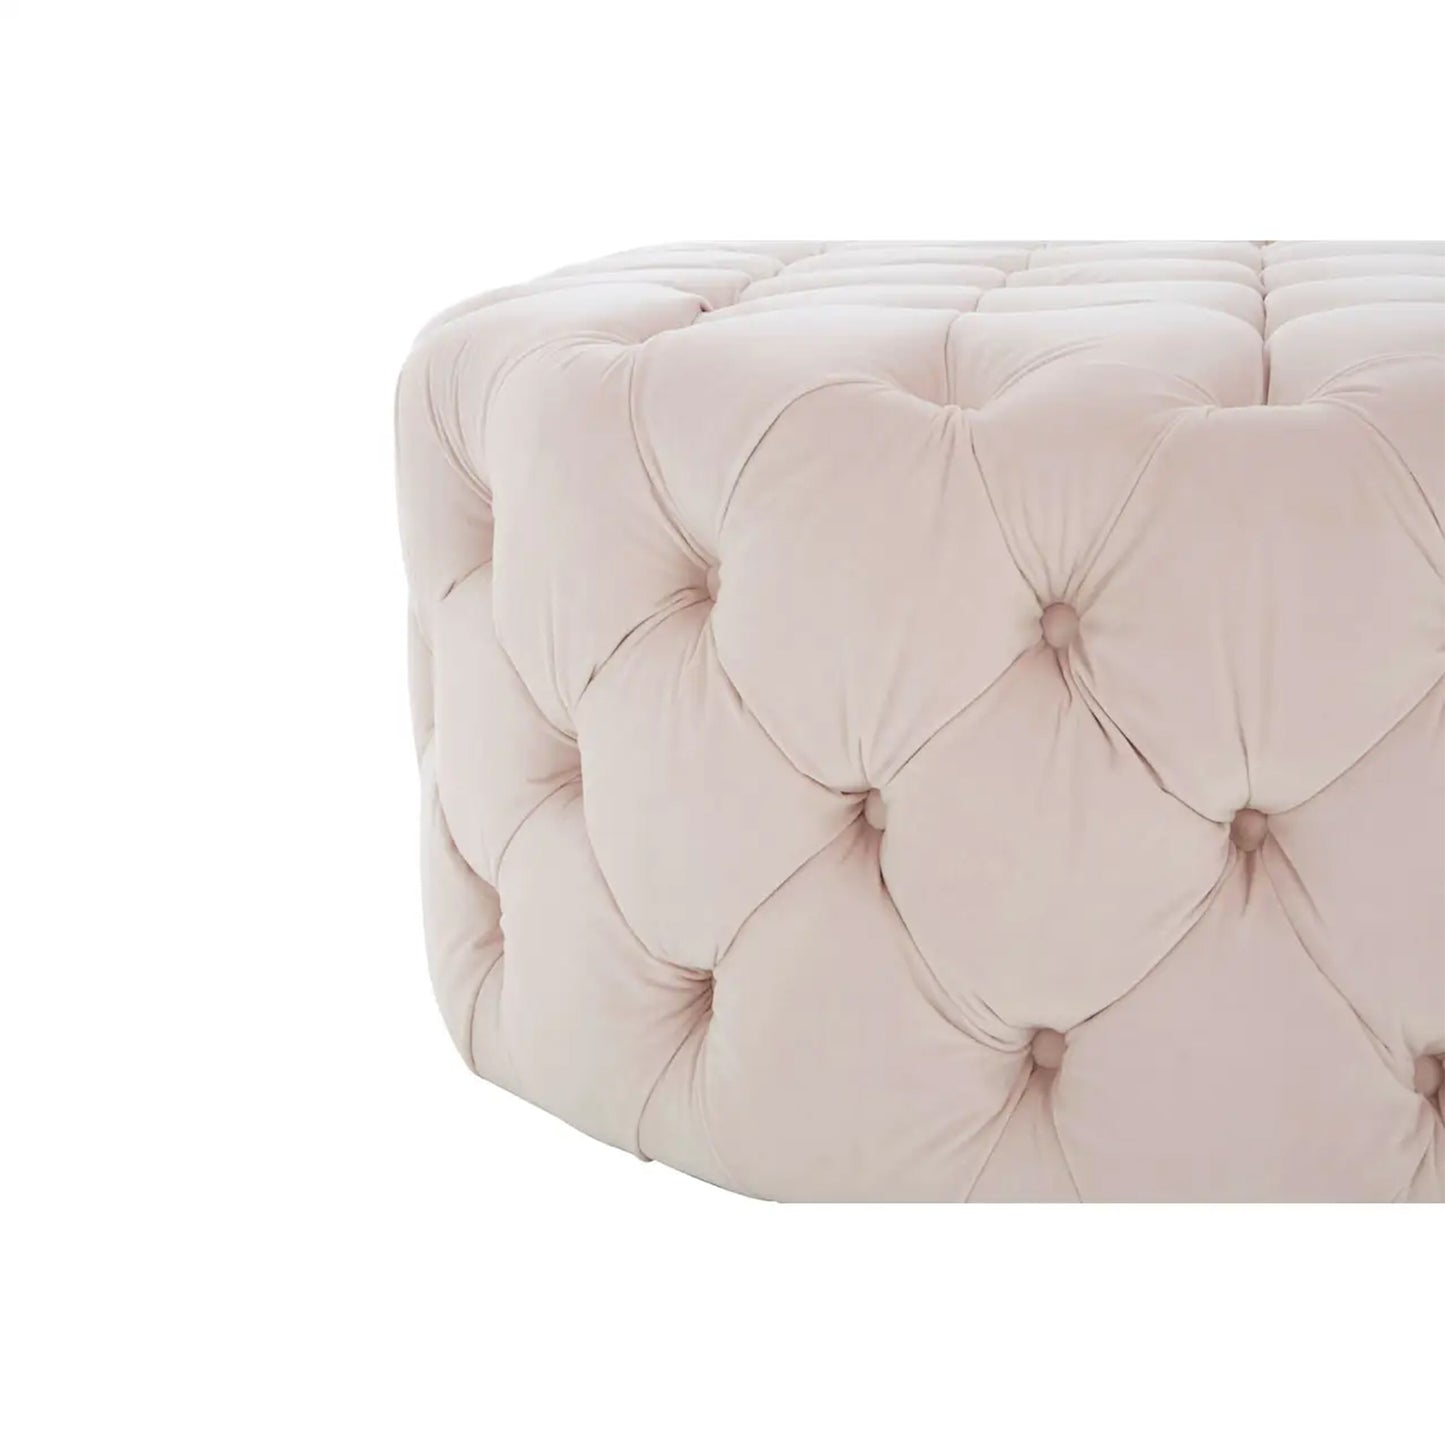 Large Round Footstool in Neutral Blossom